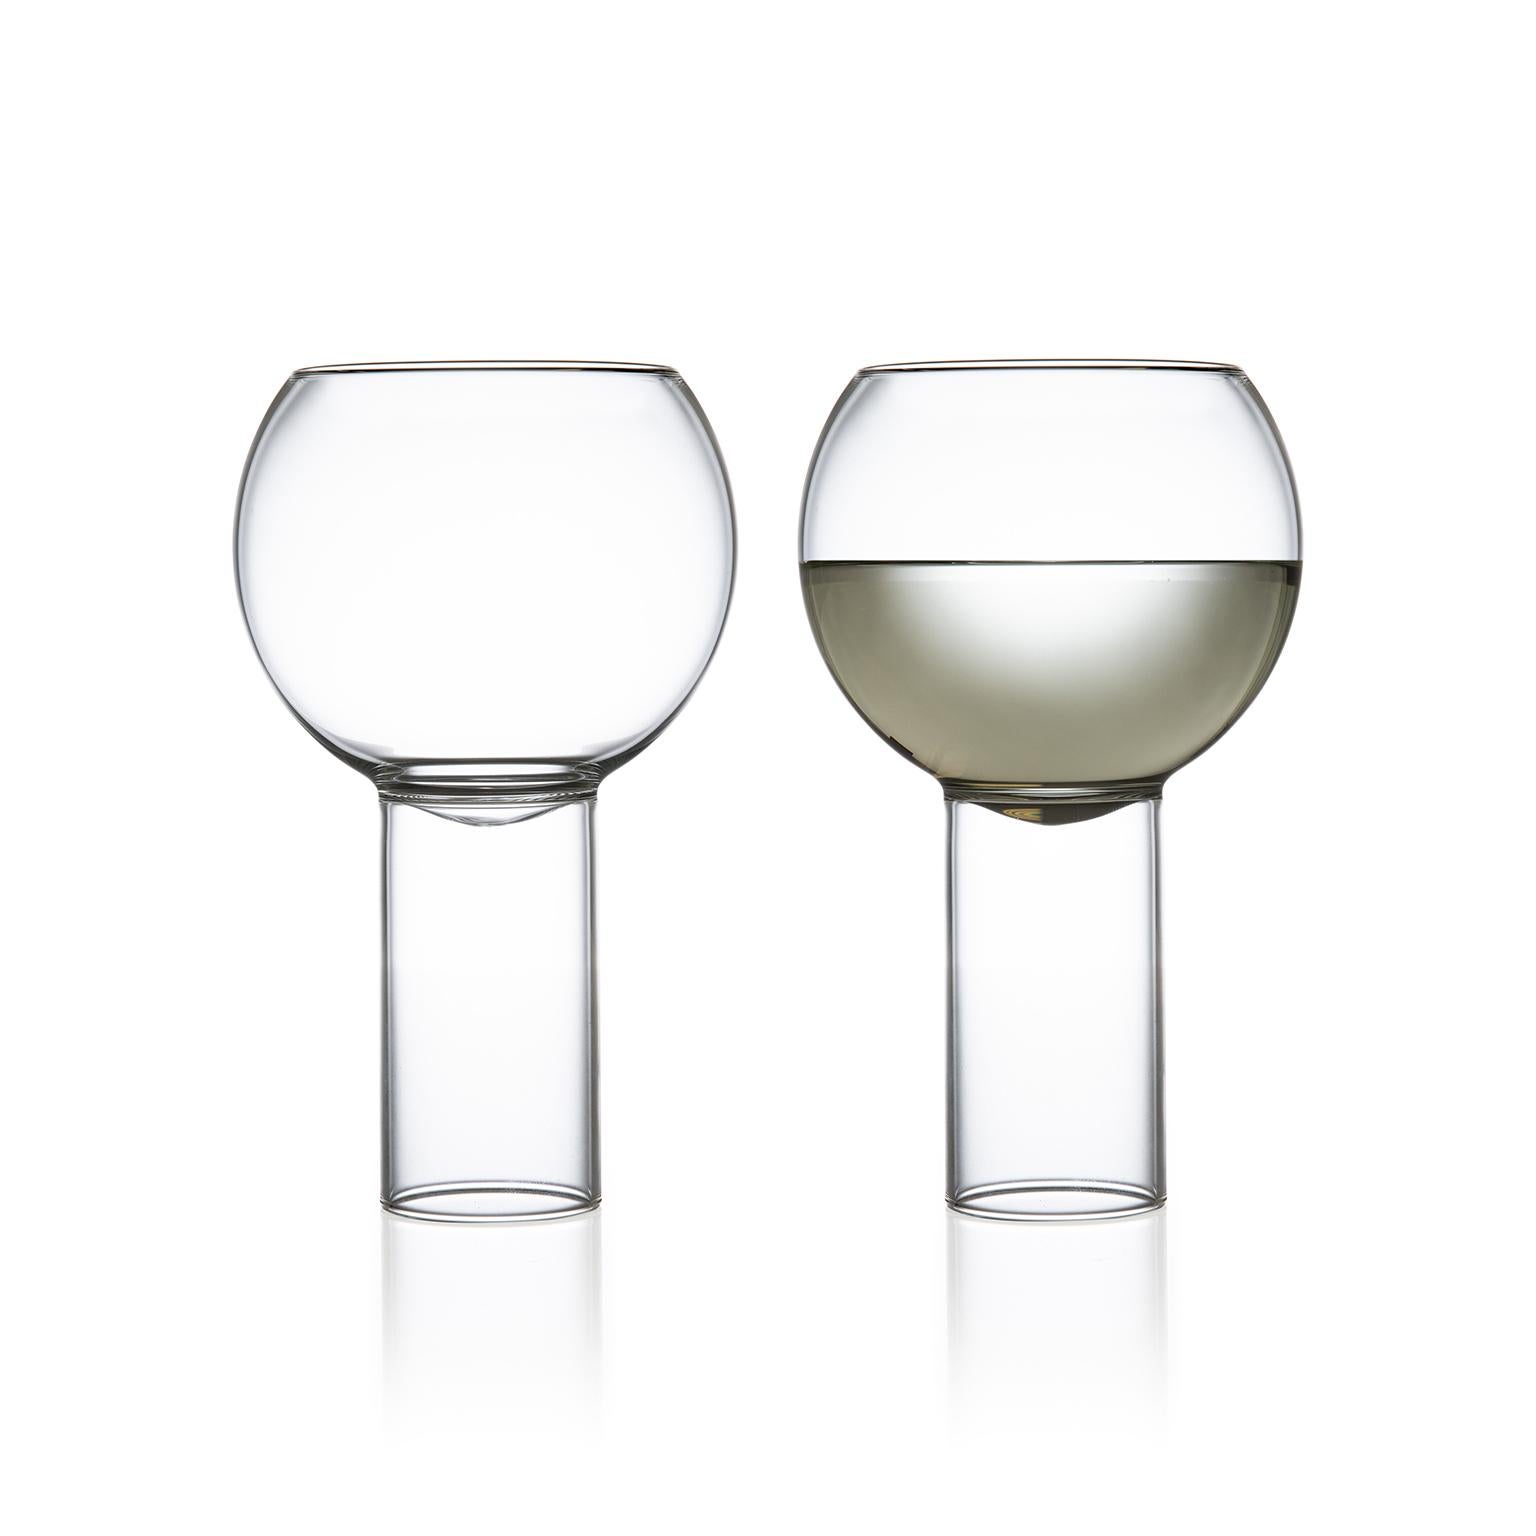 Tulip tall medium, set of two

The Tulip collection was inspired by the small bistro wine glasses found in European bars and cafes. The bowl of the glass sits down into the cylindrical stem, highlighting the intersection between the two. With